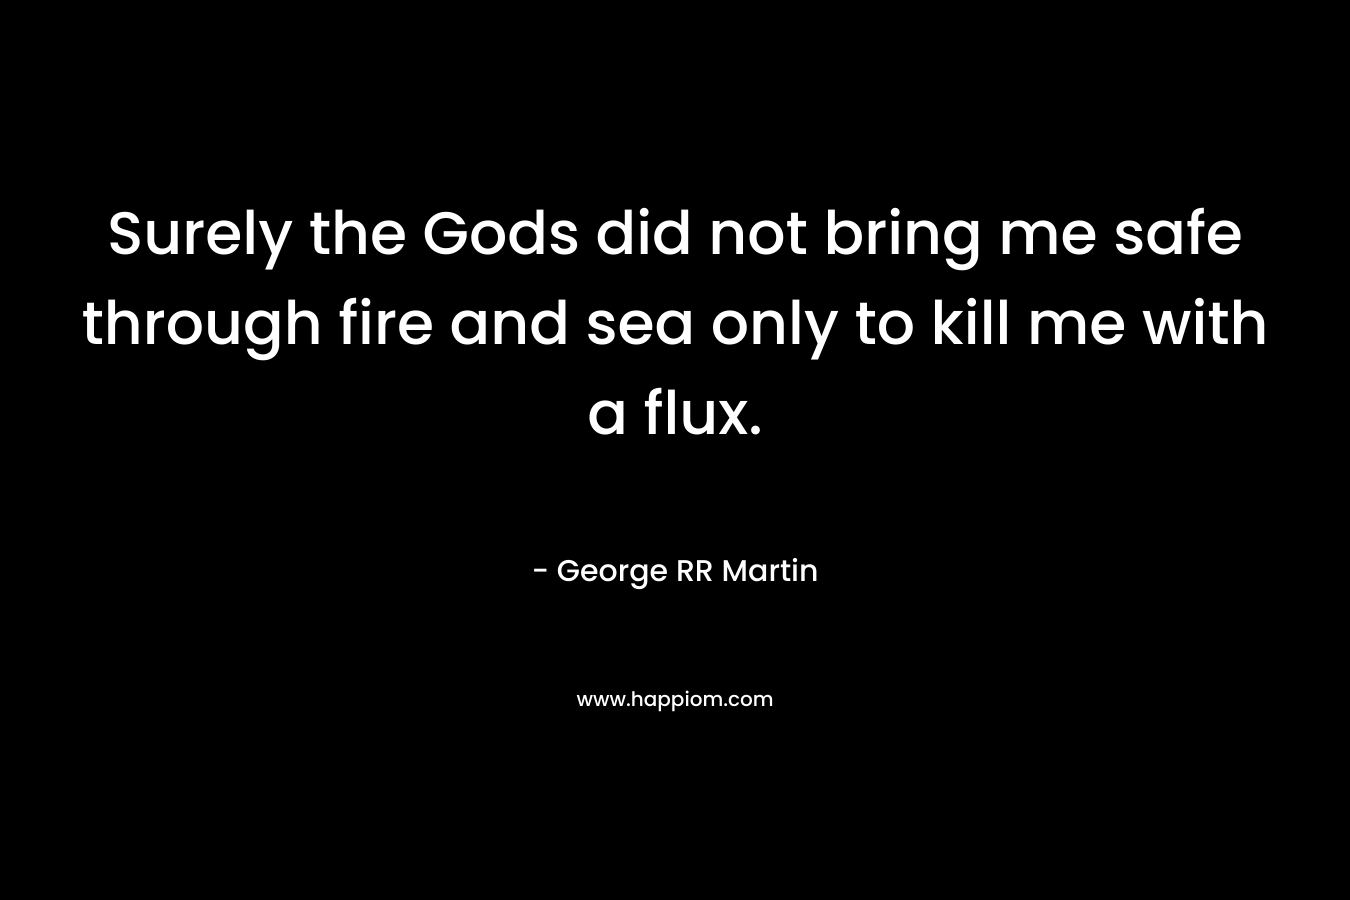 Surely the Gods did not bring me safe through fire and sea only to kill me with a flux.